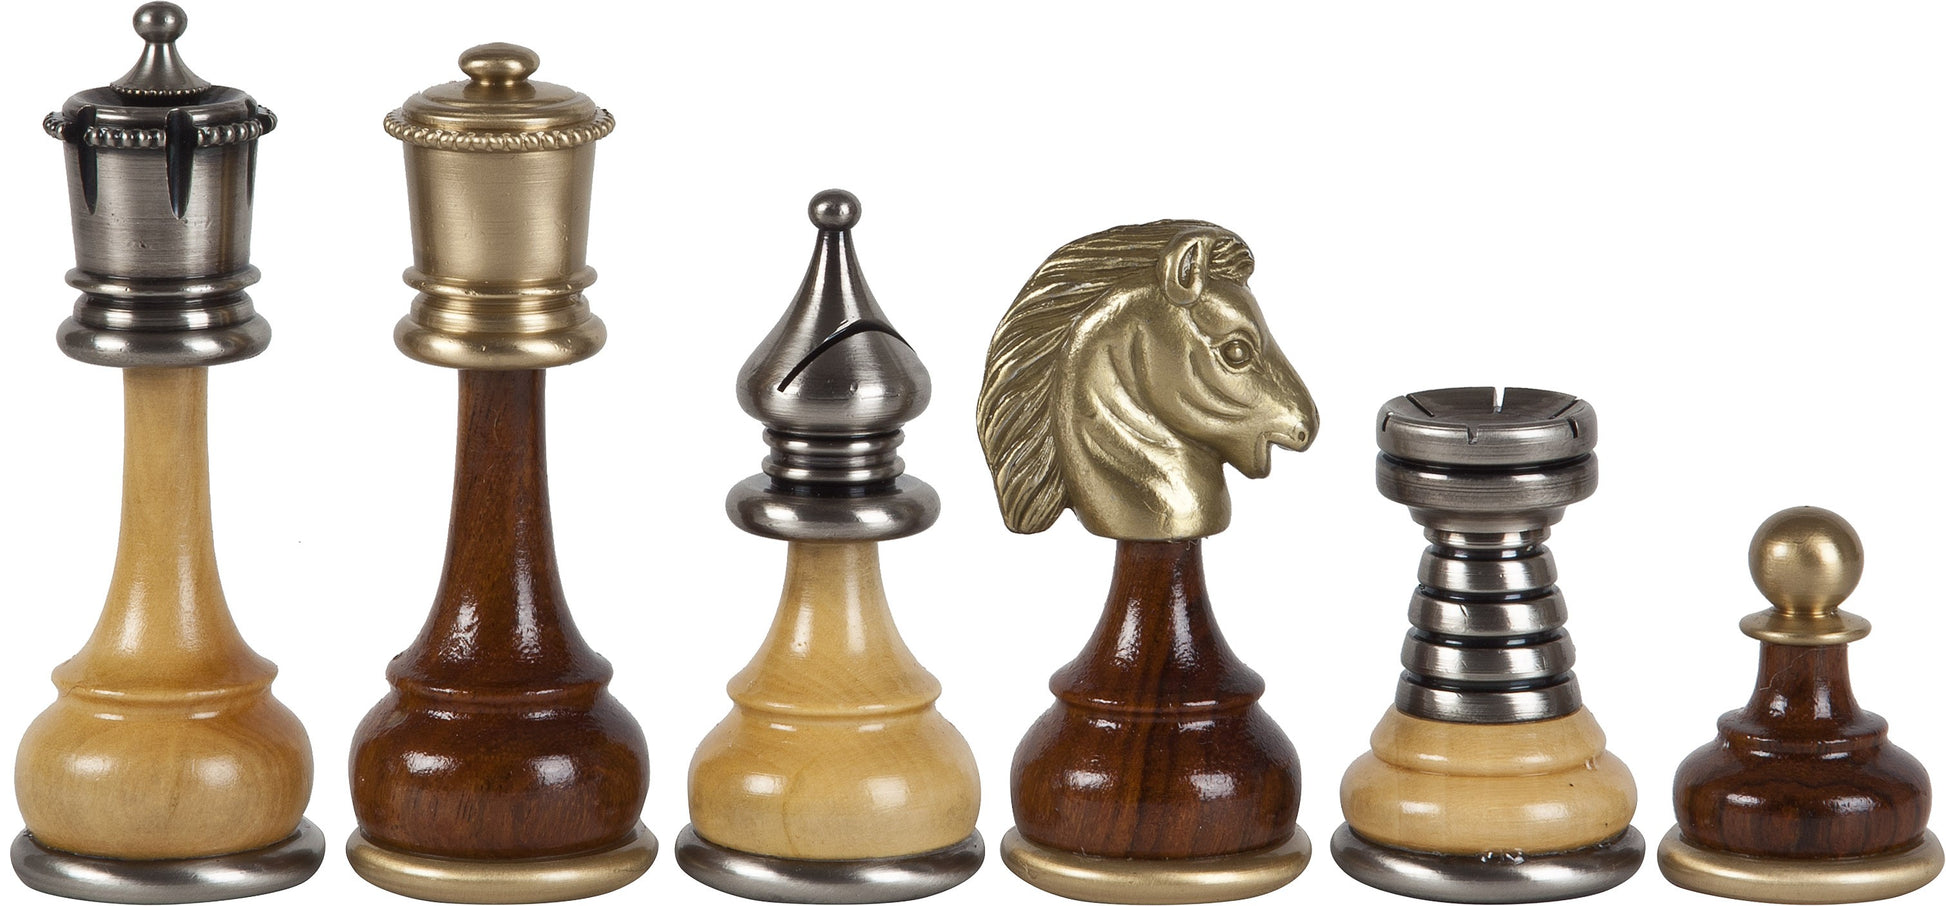 Italian Tournament - Silver-Plated Brass Wood Chess Pieces